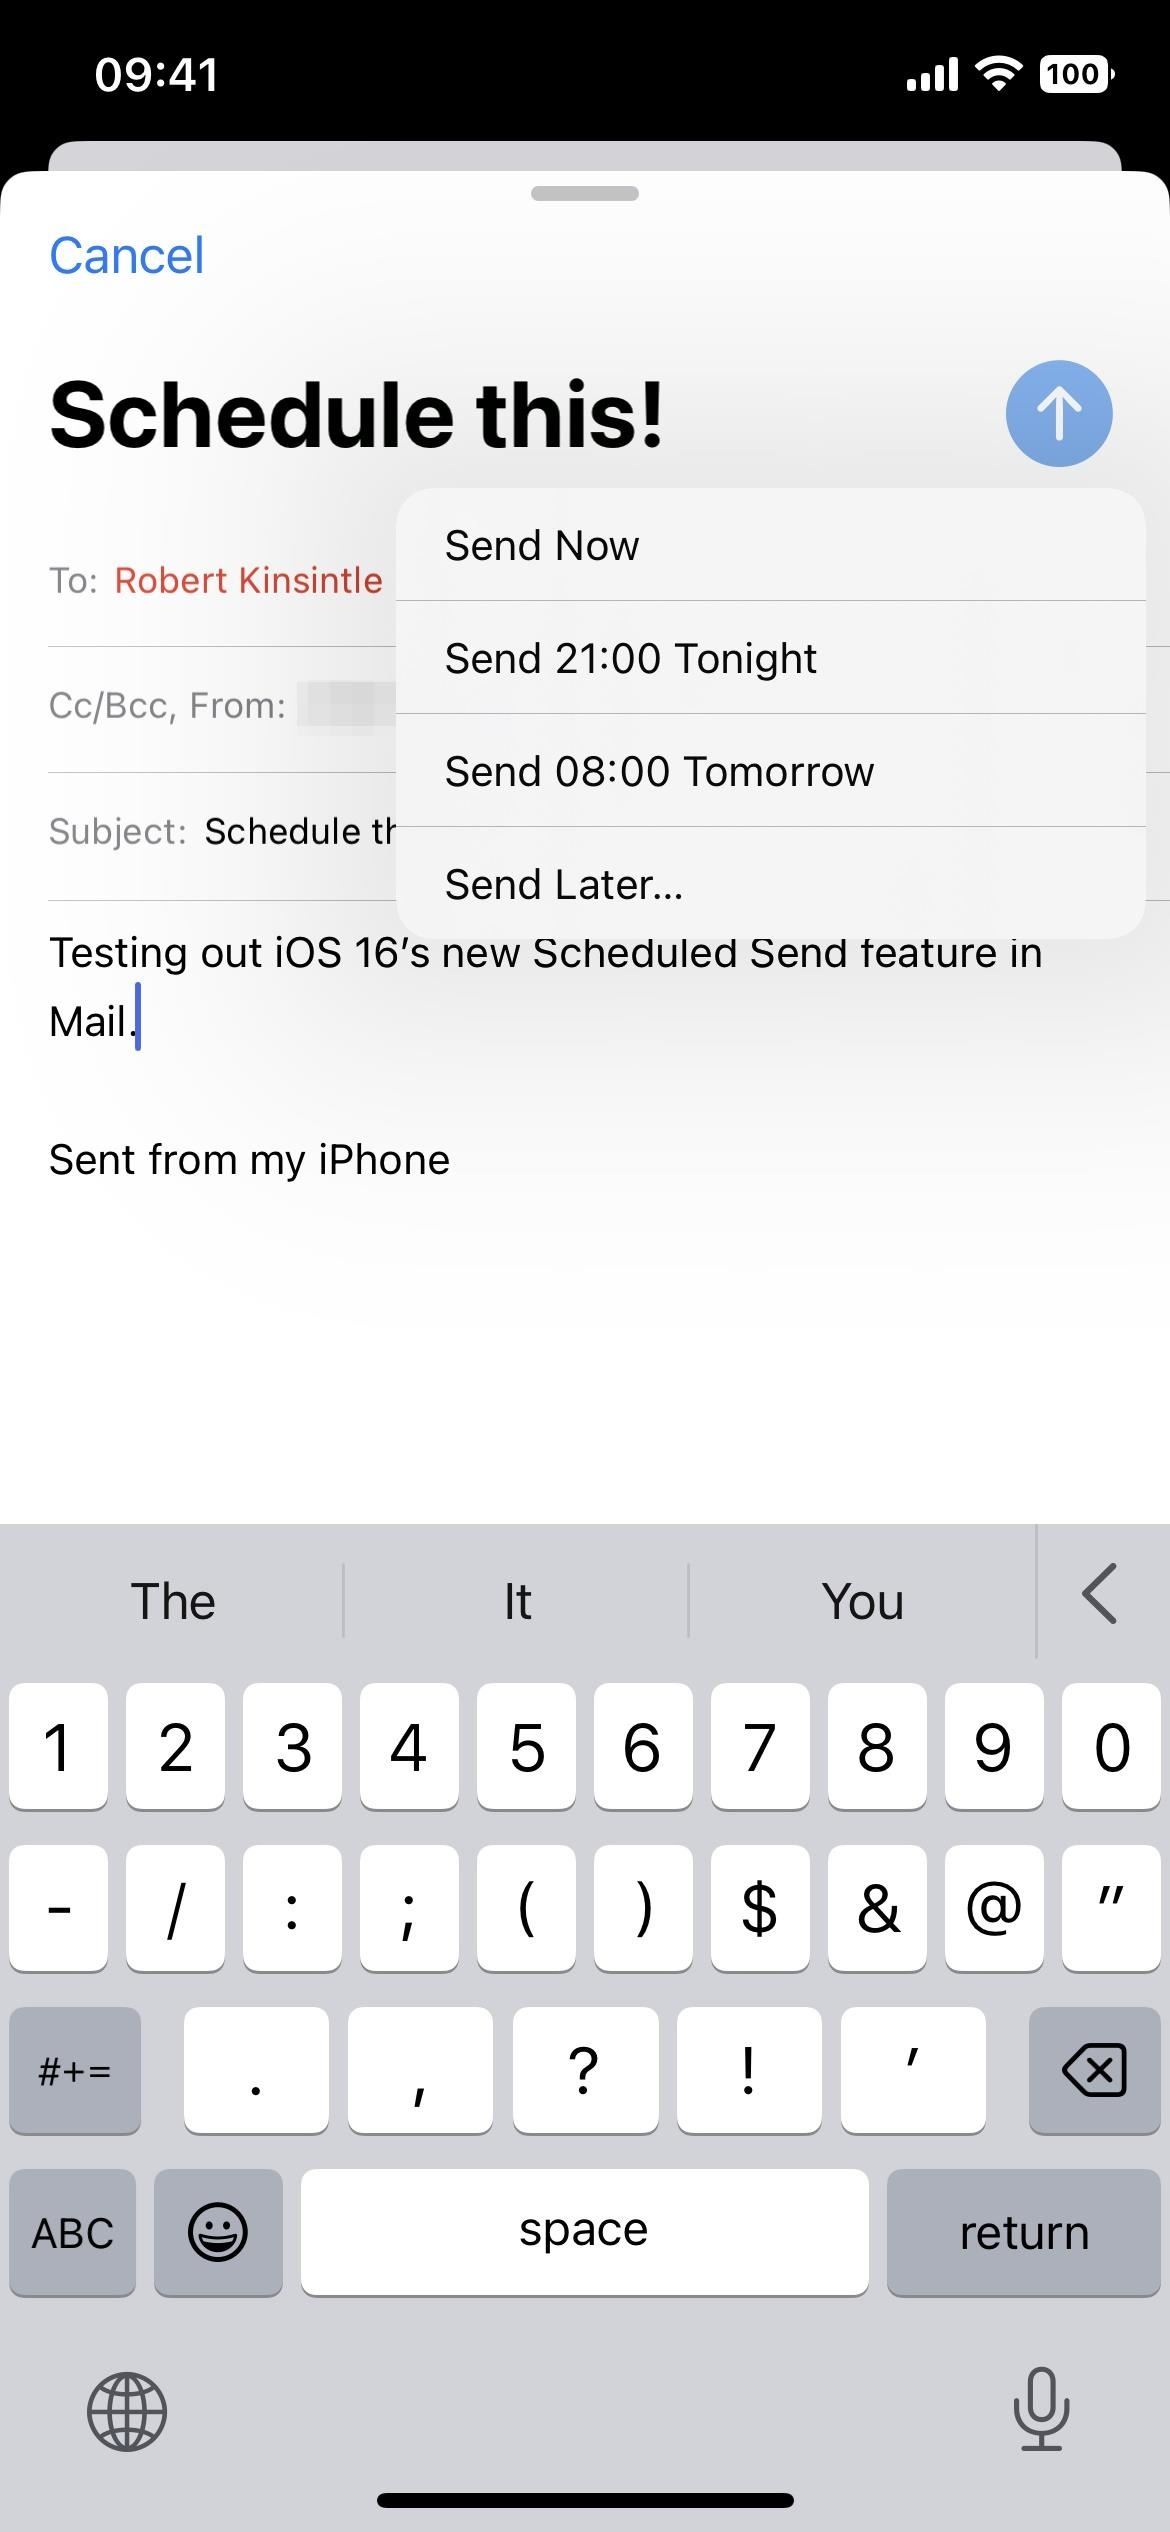 Use Your iPhone's Mail App to Schedule Emails That Auto-Send at Specific Dates and Times